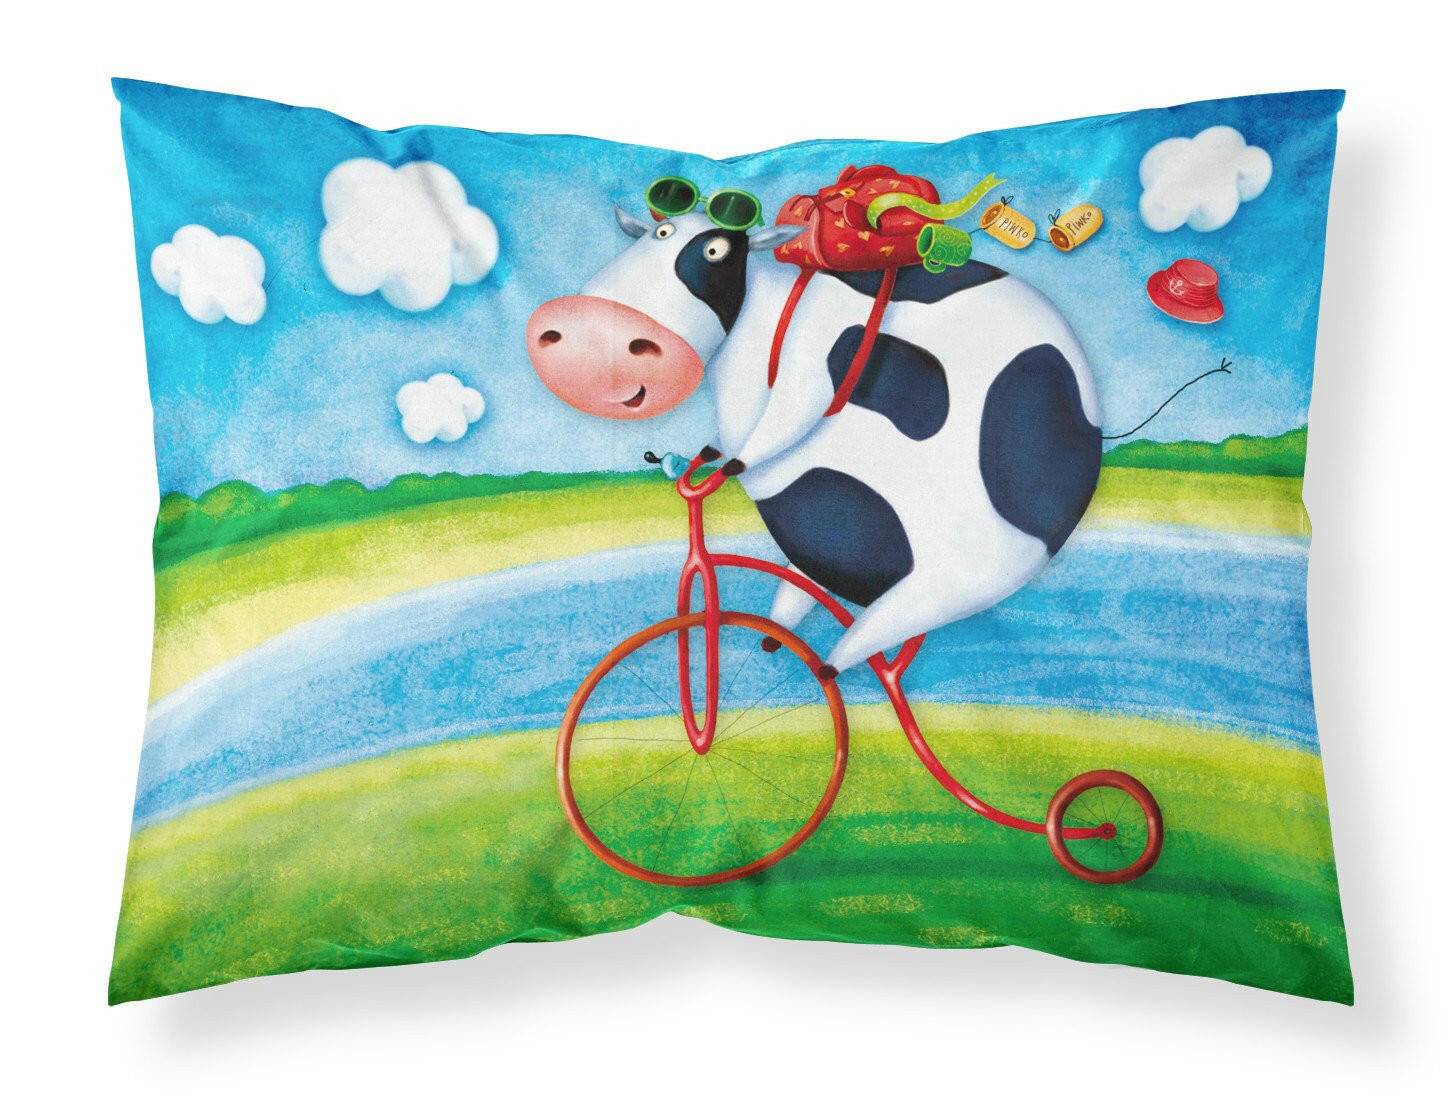 Cow riding Bicycle Fabric Standard Pillowcase APH0076PILLOWCASE by Caroline's Treasures